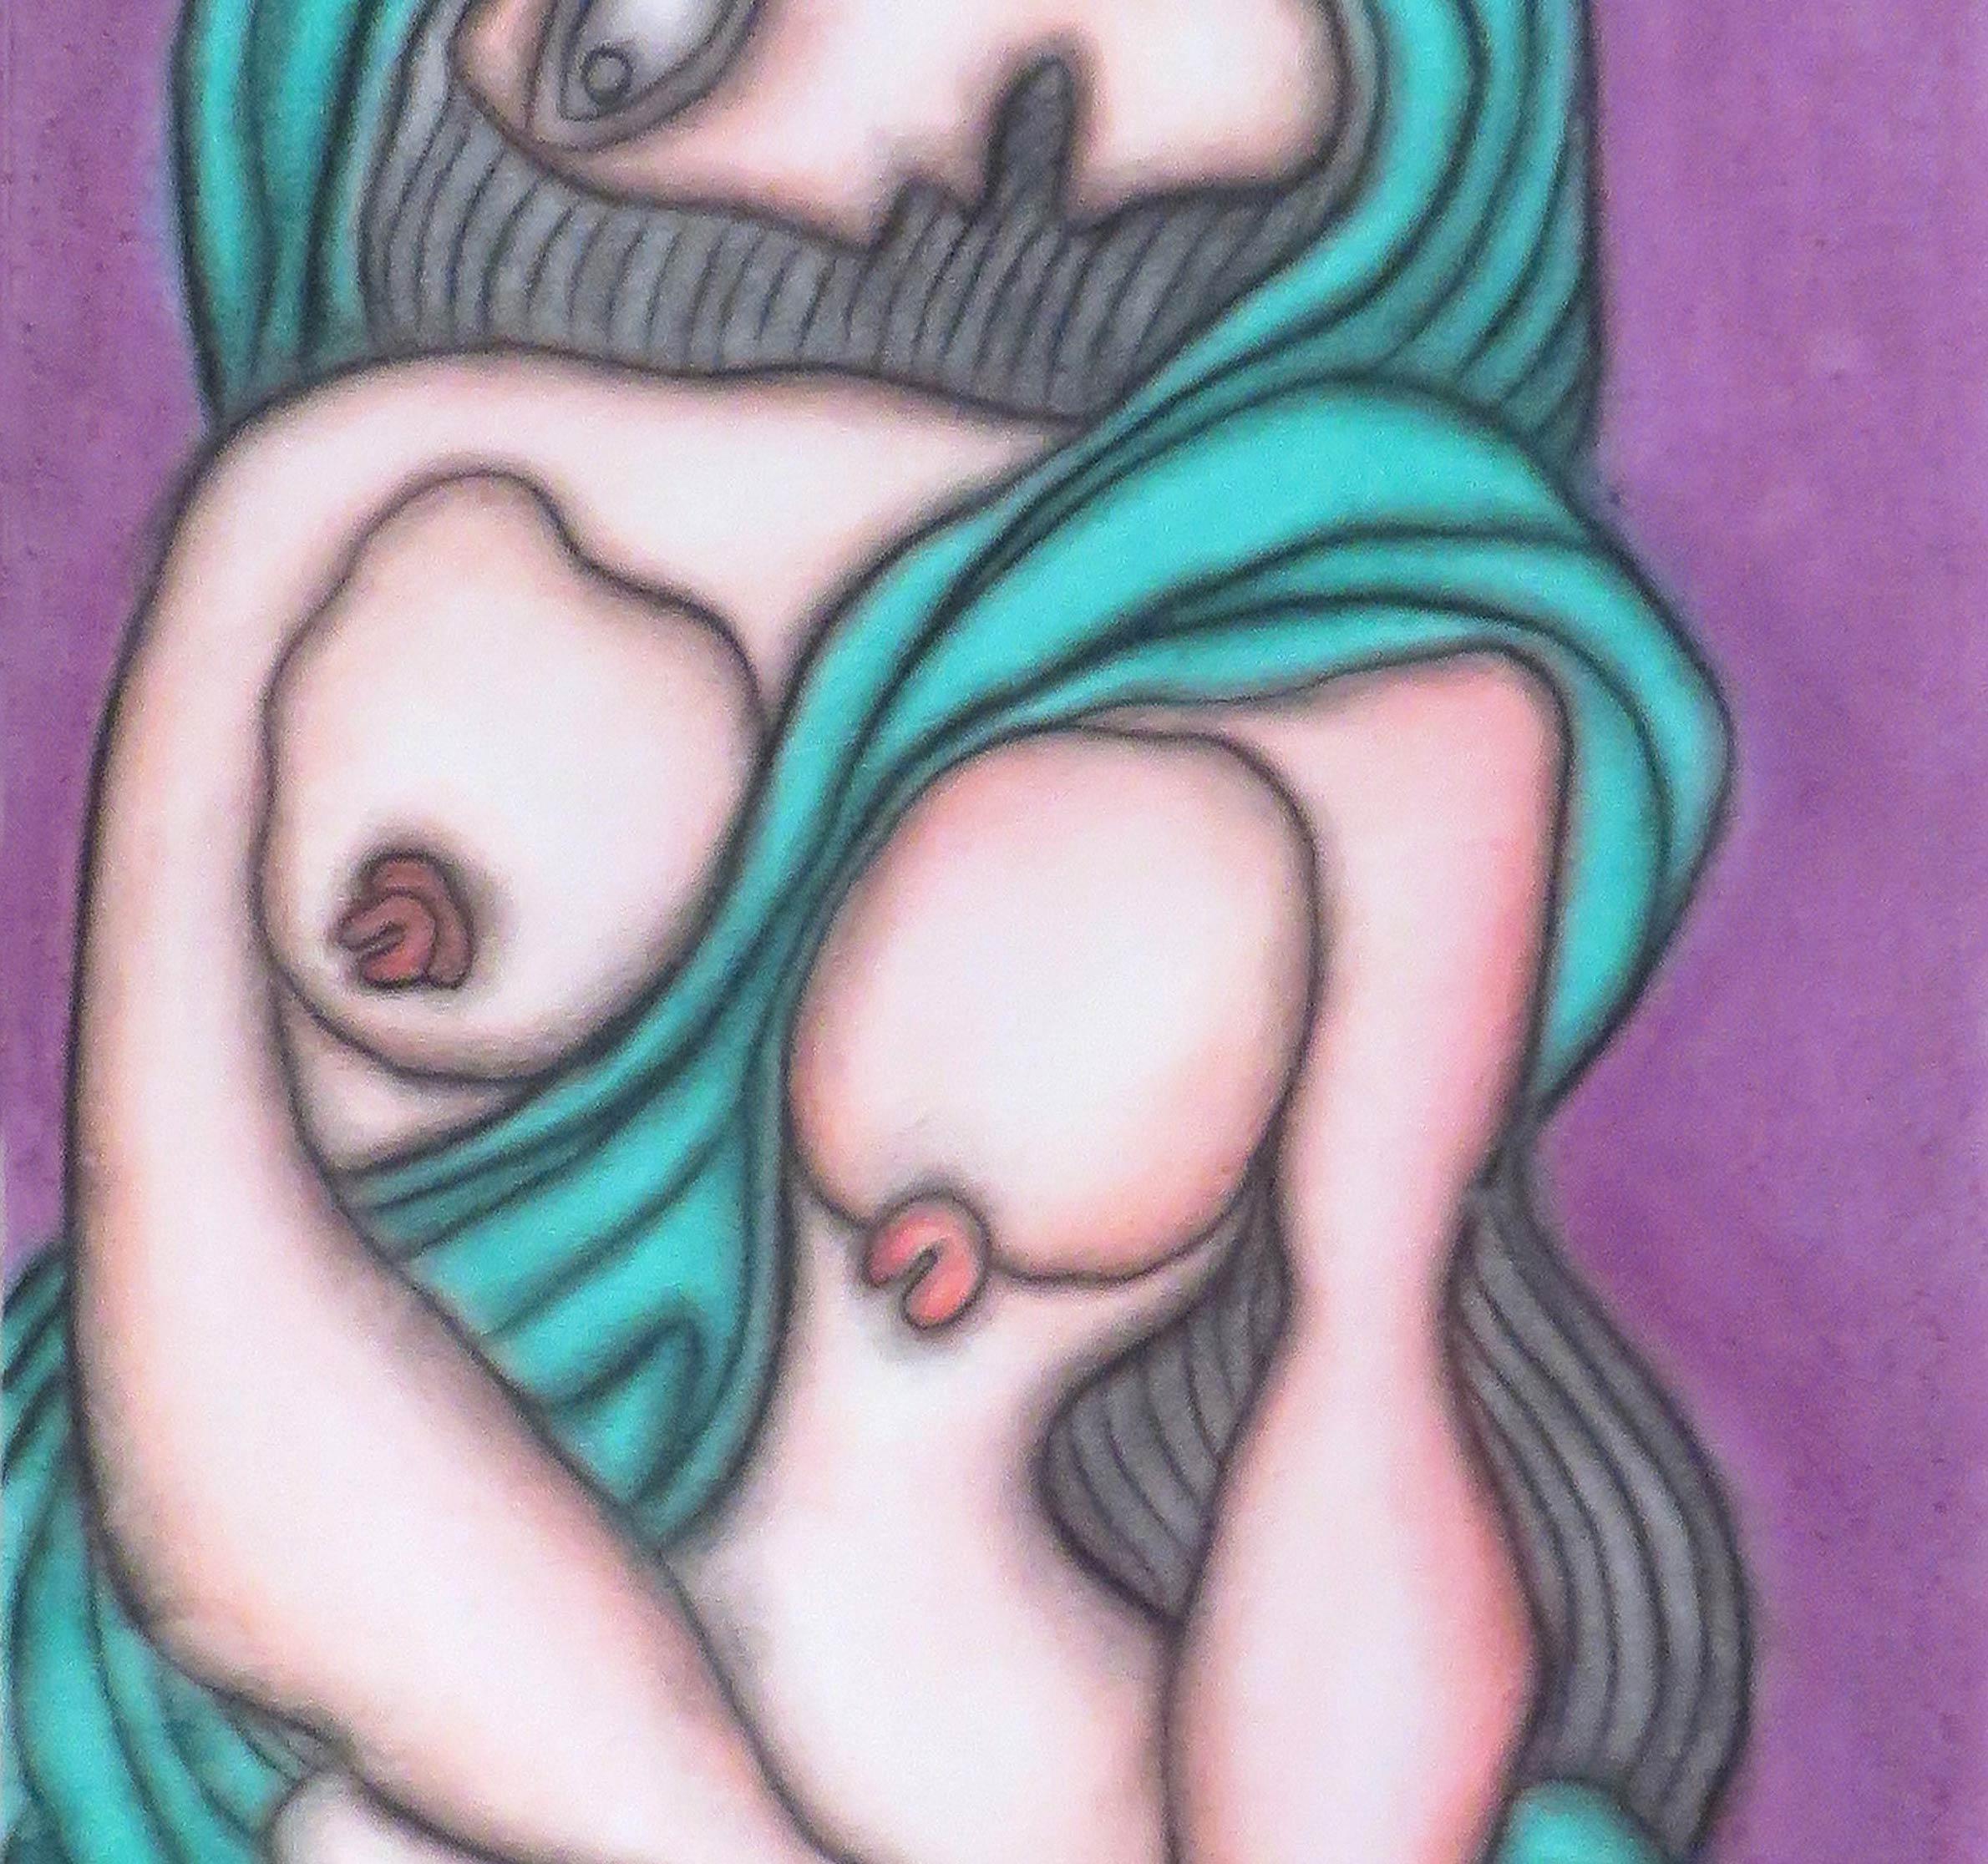 Indian Nude Woman in Green Saree, Pastel on Board, Master Indian Artist